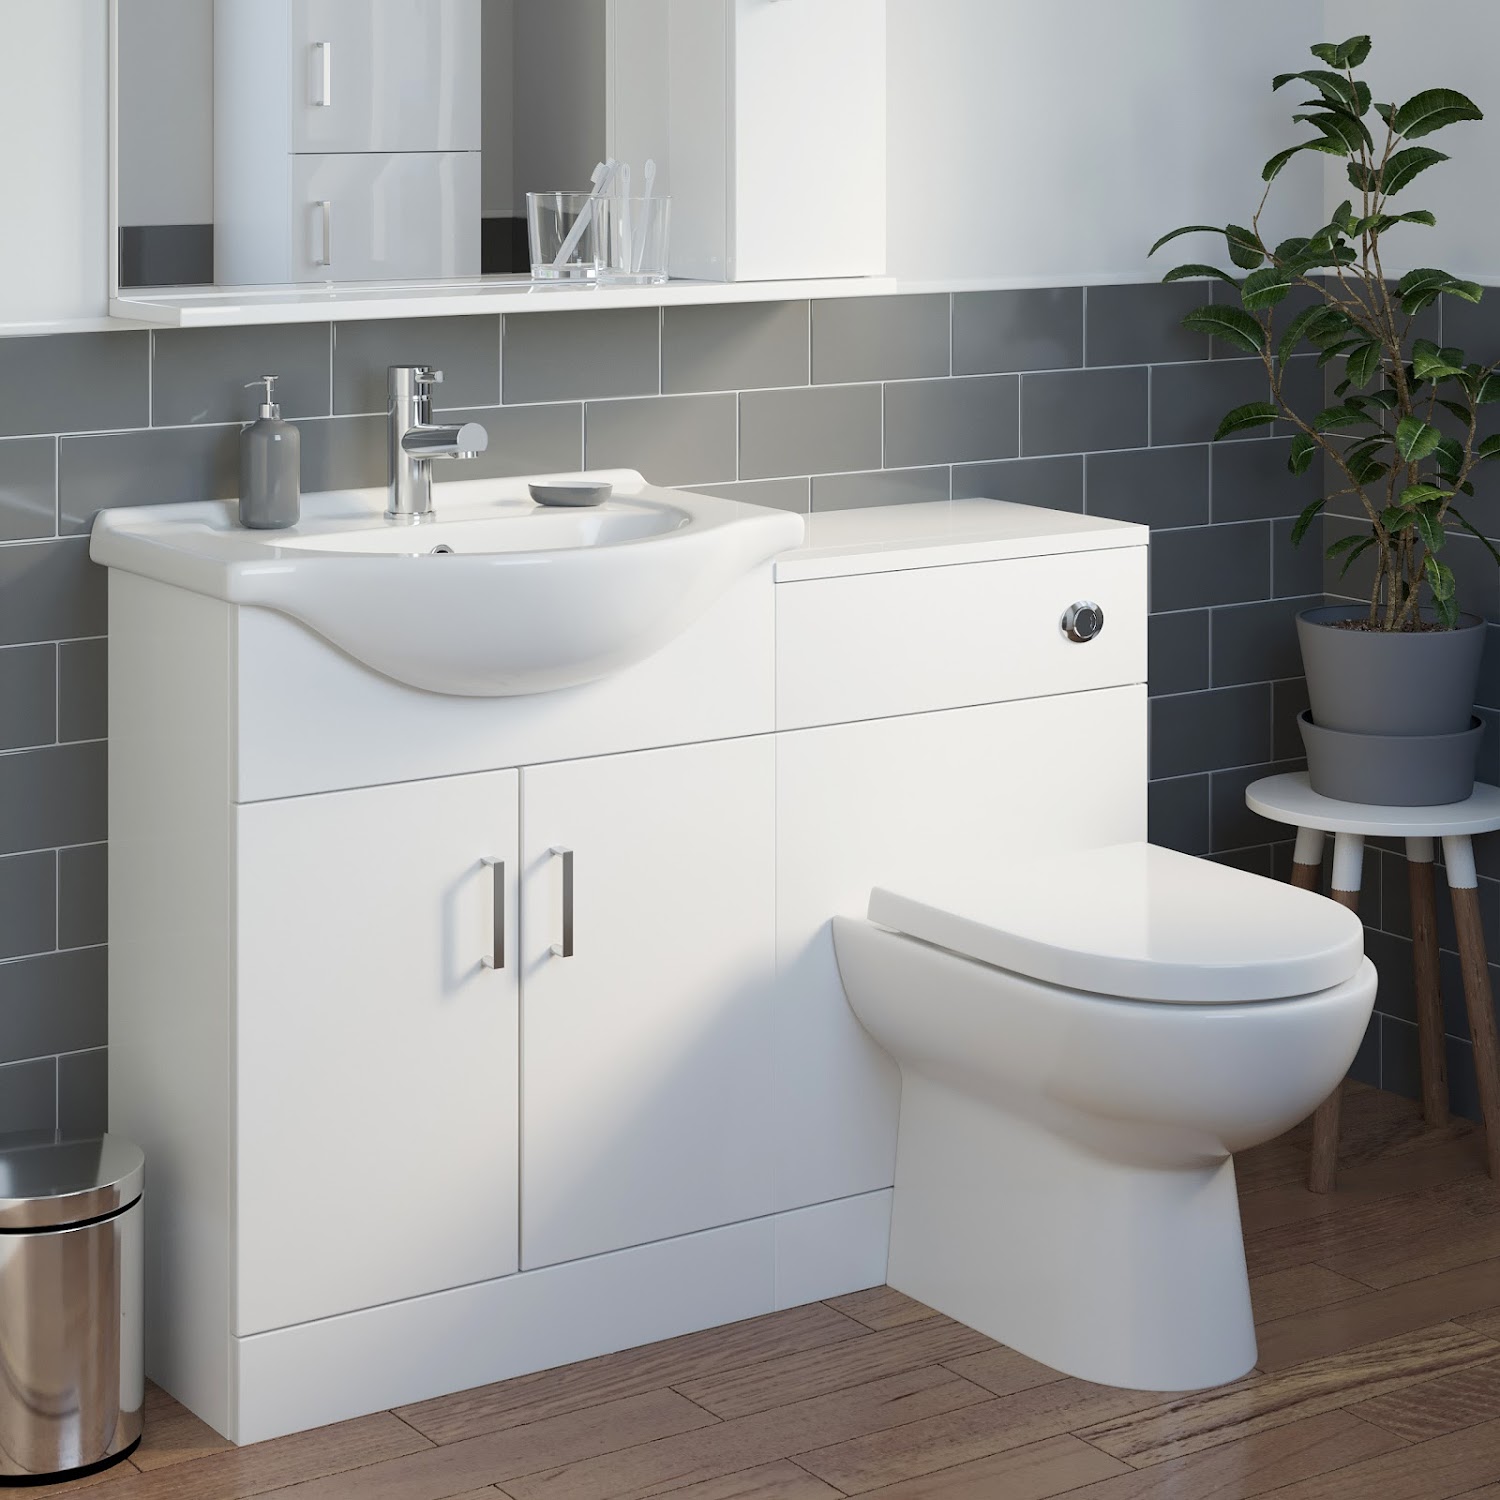 1150mm Toilet and Bathroom Vanity Unit Combined Basin Sink Furniture ...